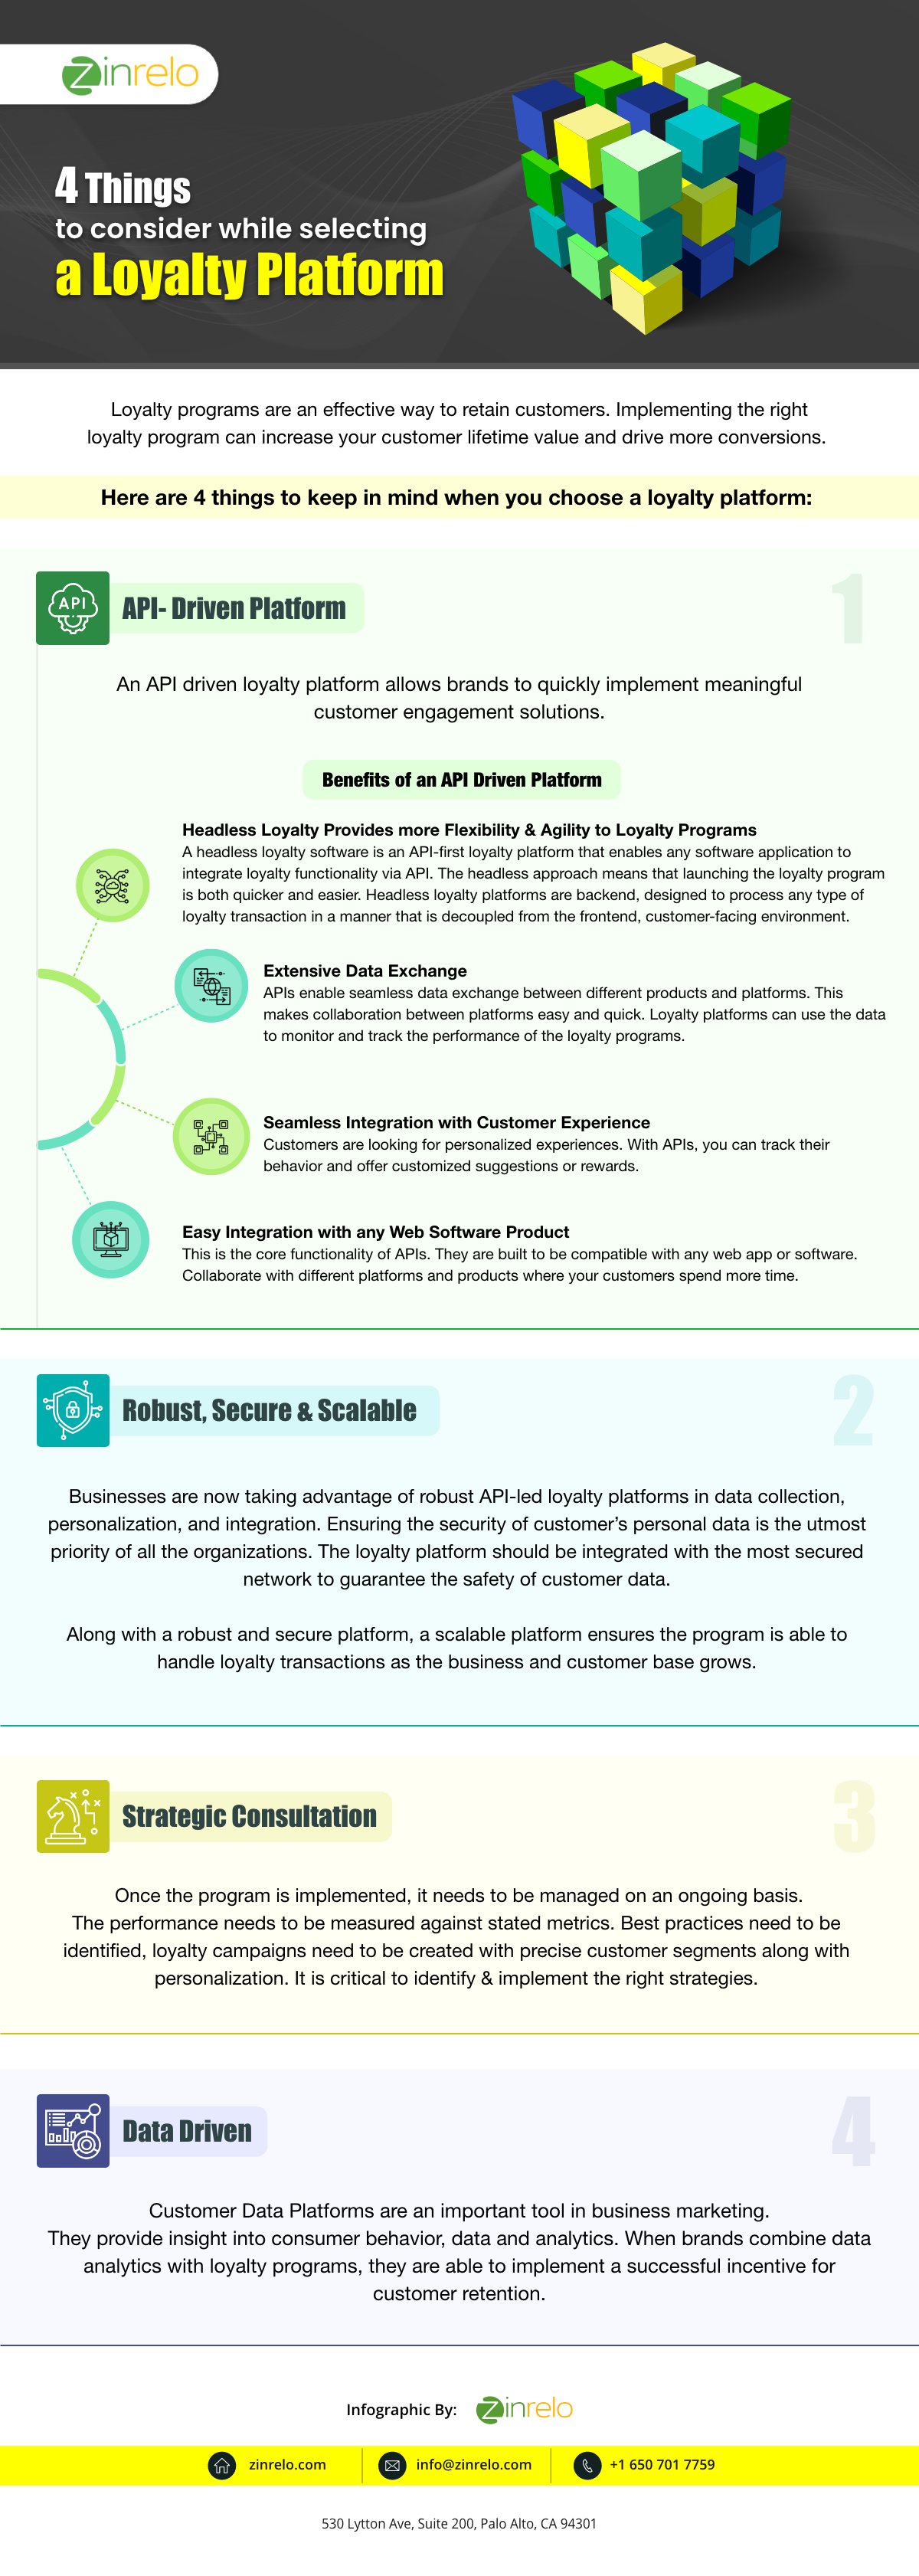 , 4 Things to consider while selecting a loyalty platform infographic